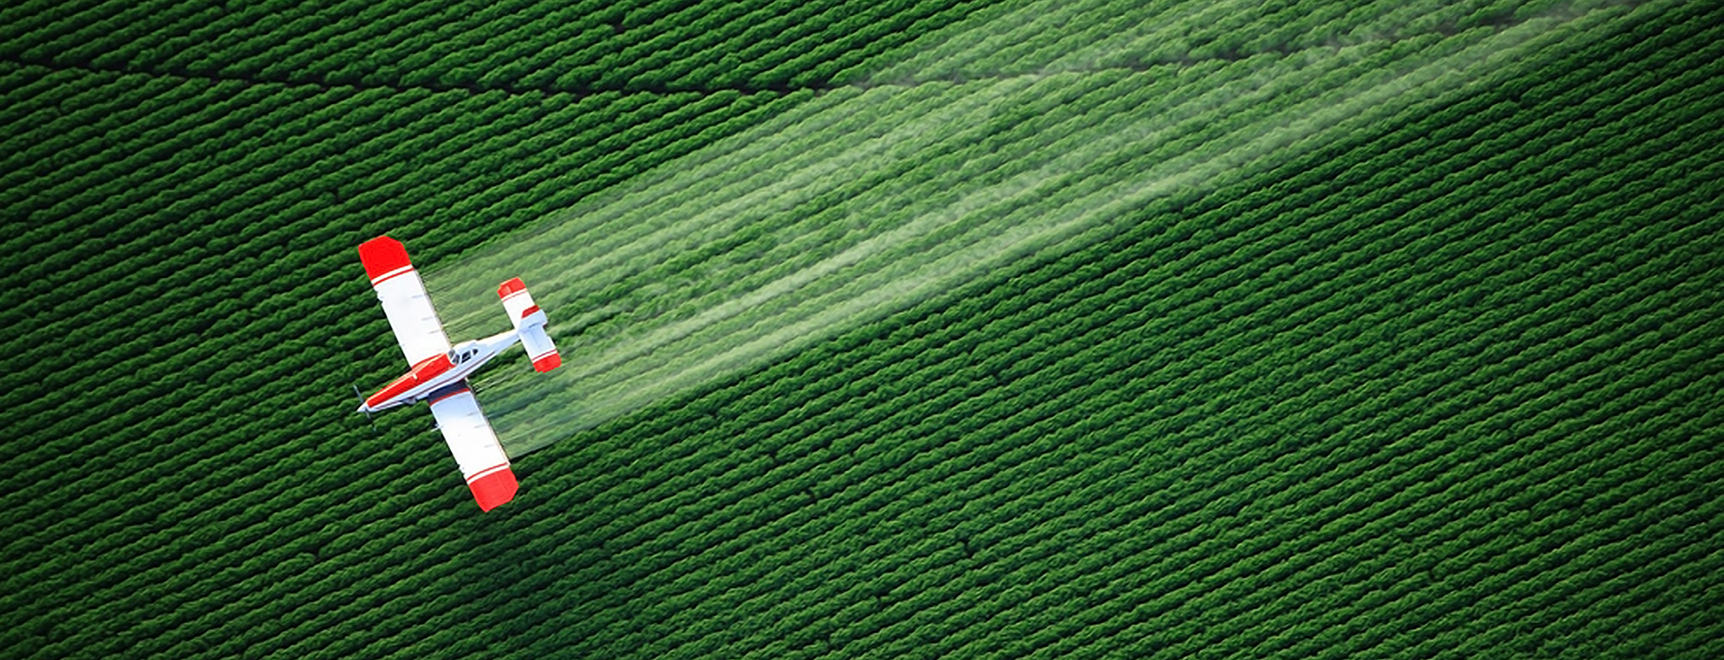 An aerial view of a crop duster or aerial applicator  flying low  and spraying agricultural chemicals  over lush green potato fields